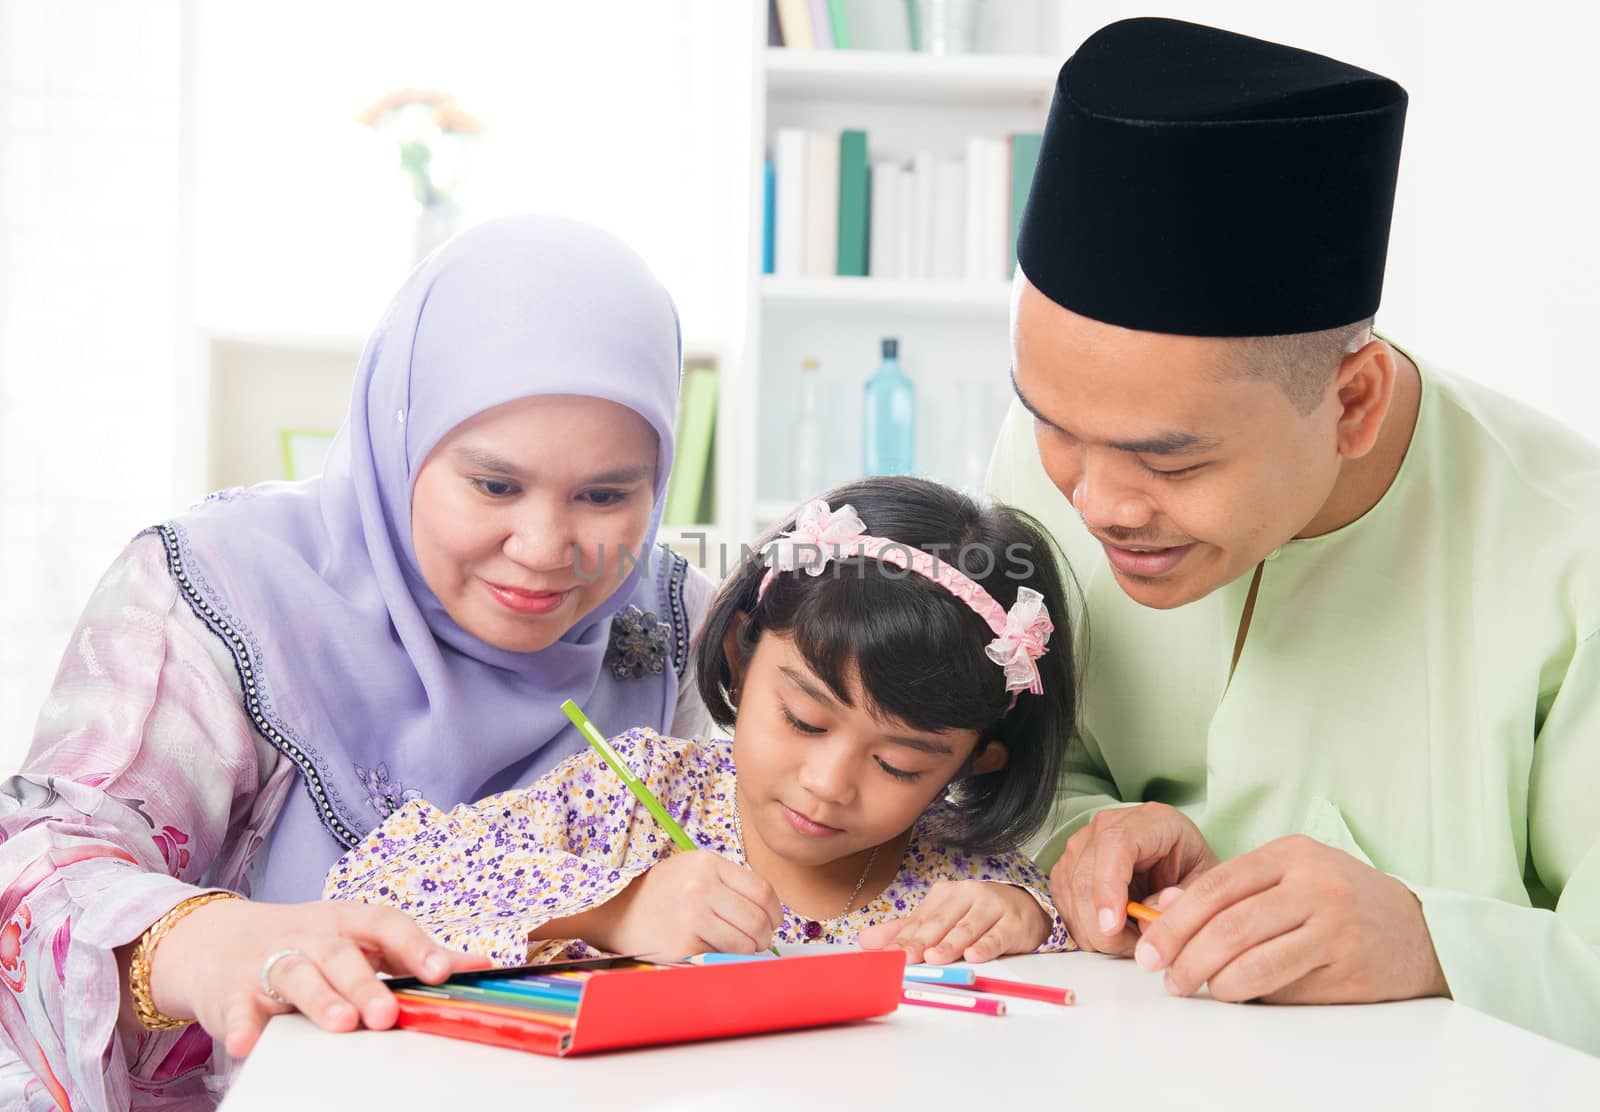 Southeast Asian family drawing and painting picture at home. Muslim family lifestyle. Happy smiling parents and child.